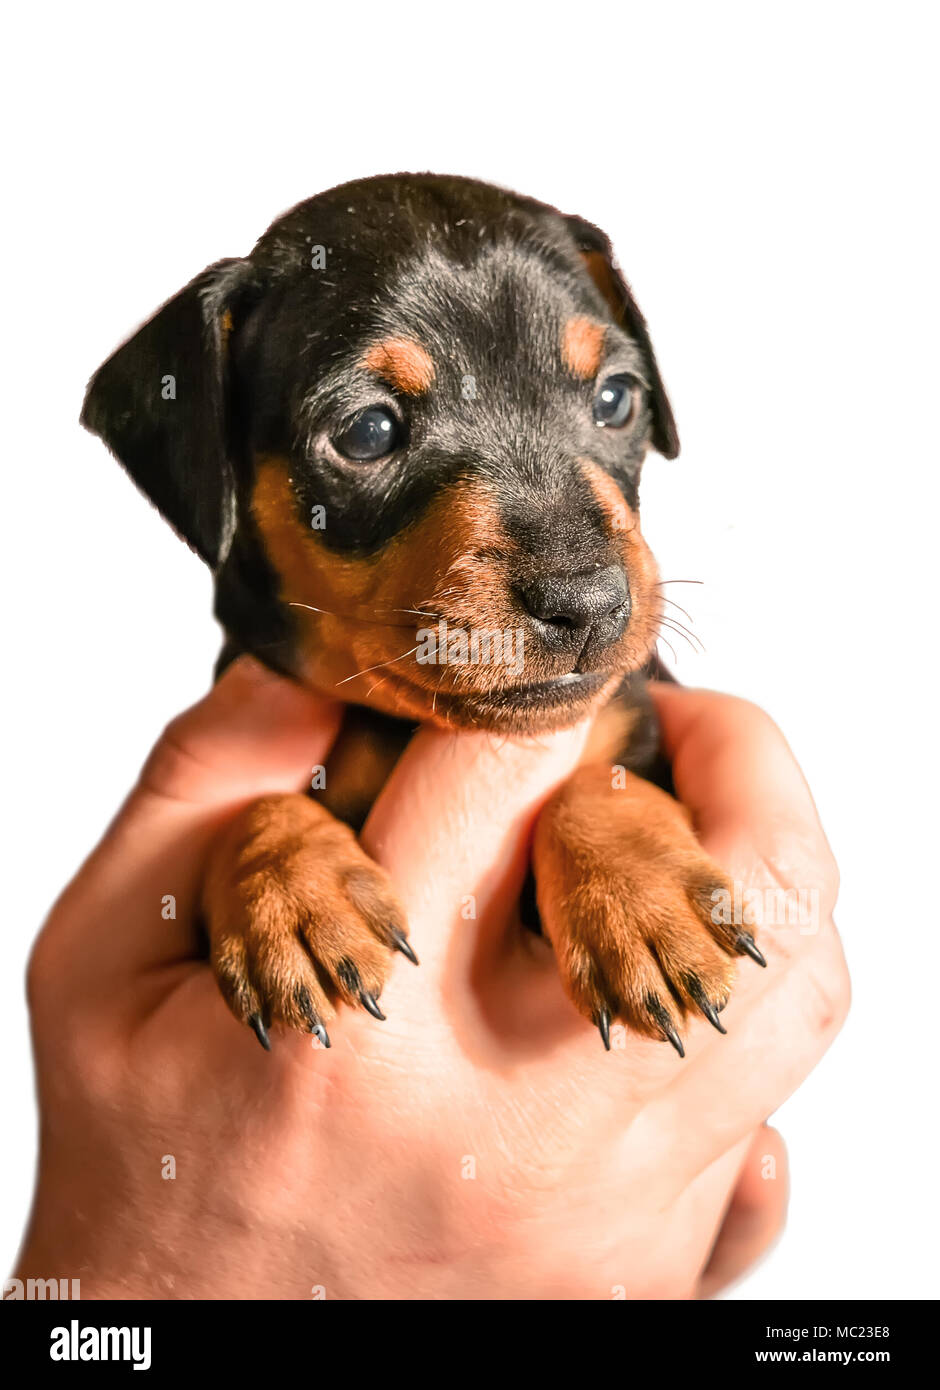 Adorable miniature pinscher puppy in hand on white background Stock Photo